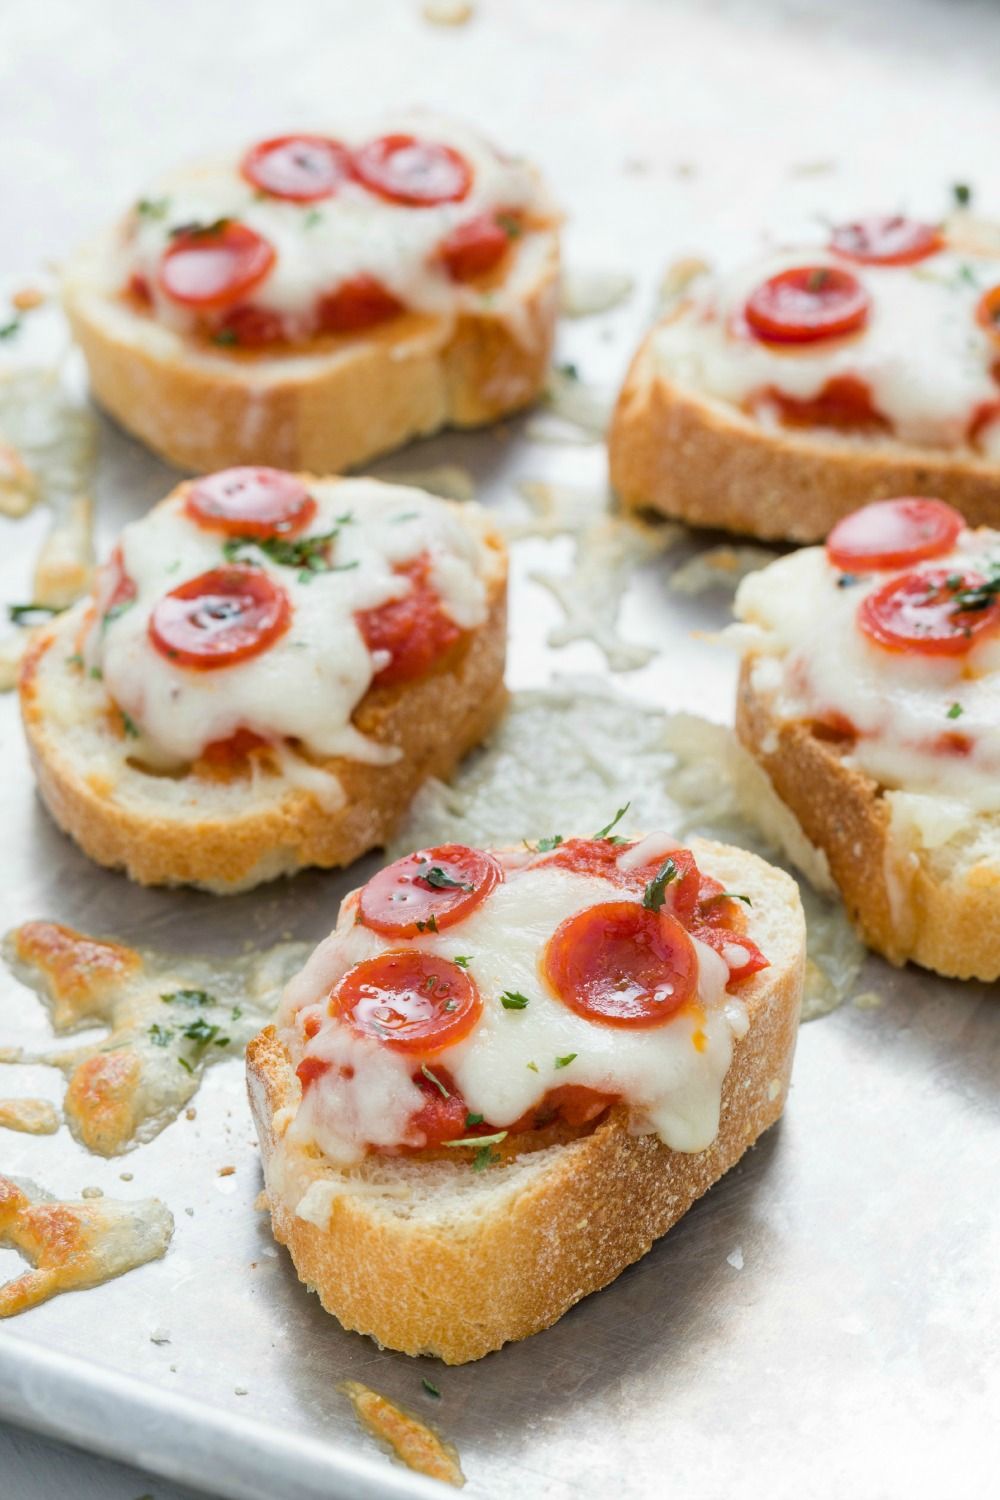 14 Crostini And Toppings Recipes Crostini Topping Ideas